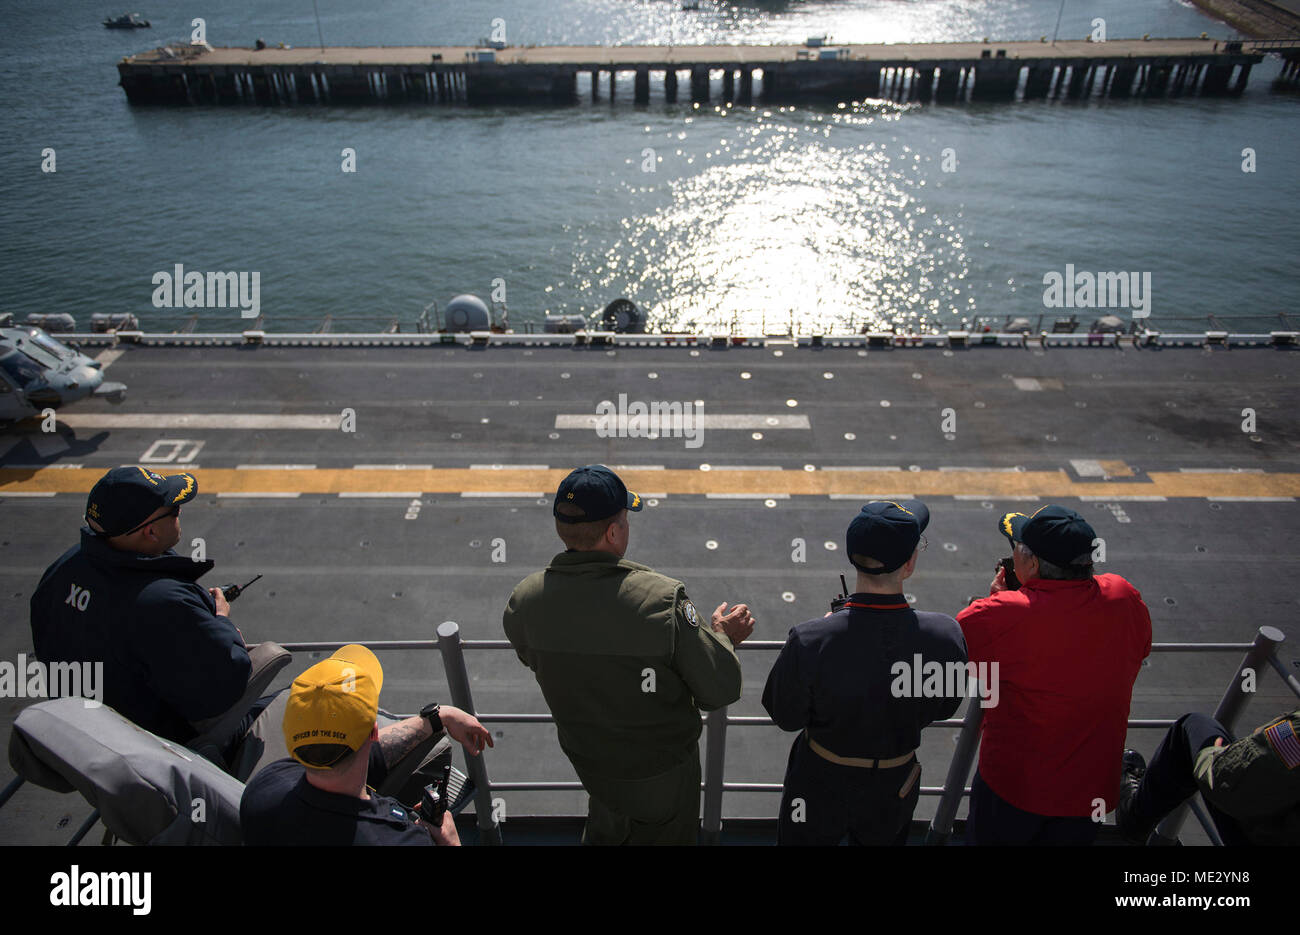 180418-N-WF272-231 SASEBO, Japan(April 18, 2018) Capt. Larry McCullen, center, commanding officer of the amphibious assault ship USS Bonhomme Richard (LHD 6), Capt. Richard Lebron, executive officer, and bridge officers observe pier operations as the ship departs Sasebo, Japan for the last time. Bonhomme Richard has been the flagship of the Amphibious Force 7th Fleet since April 2012 and will now transit to its new homeport in San Diego for follow-on operations and eventual upgrades to become F-35B Lightning II capable. (U.S. Navy photo by Mass Communication Specialist 2nd Class Diana Quinlan/ Stock Photo